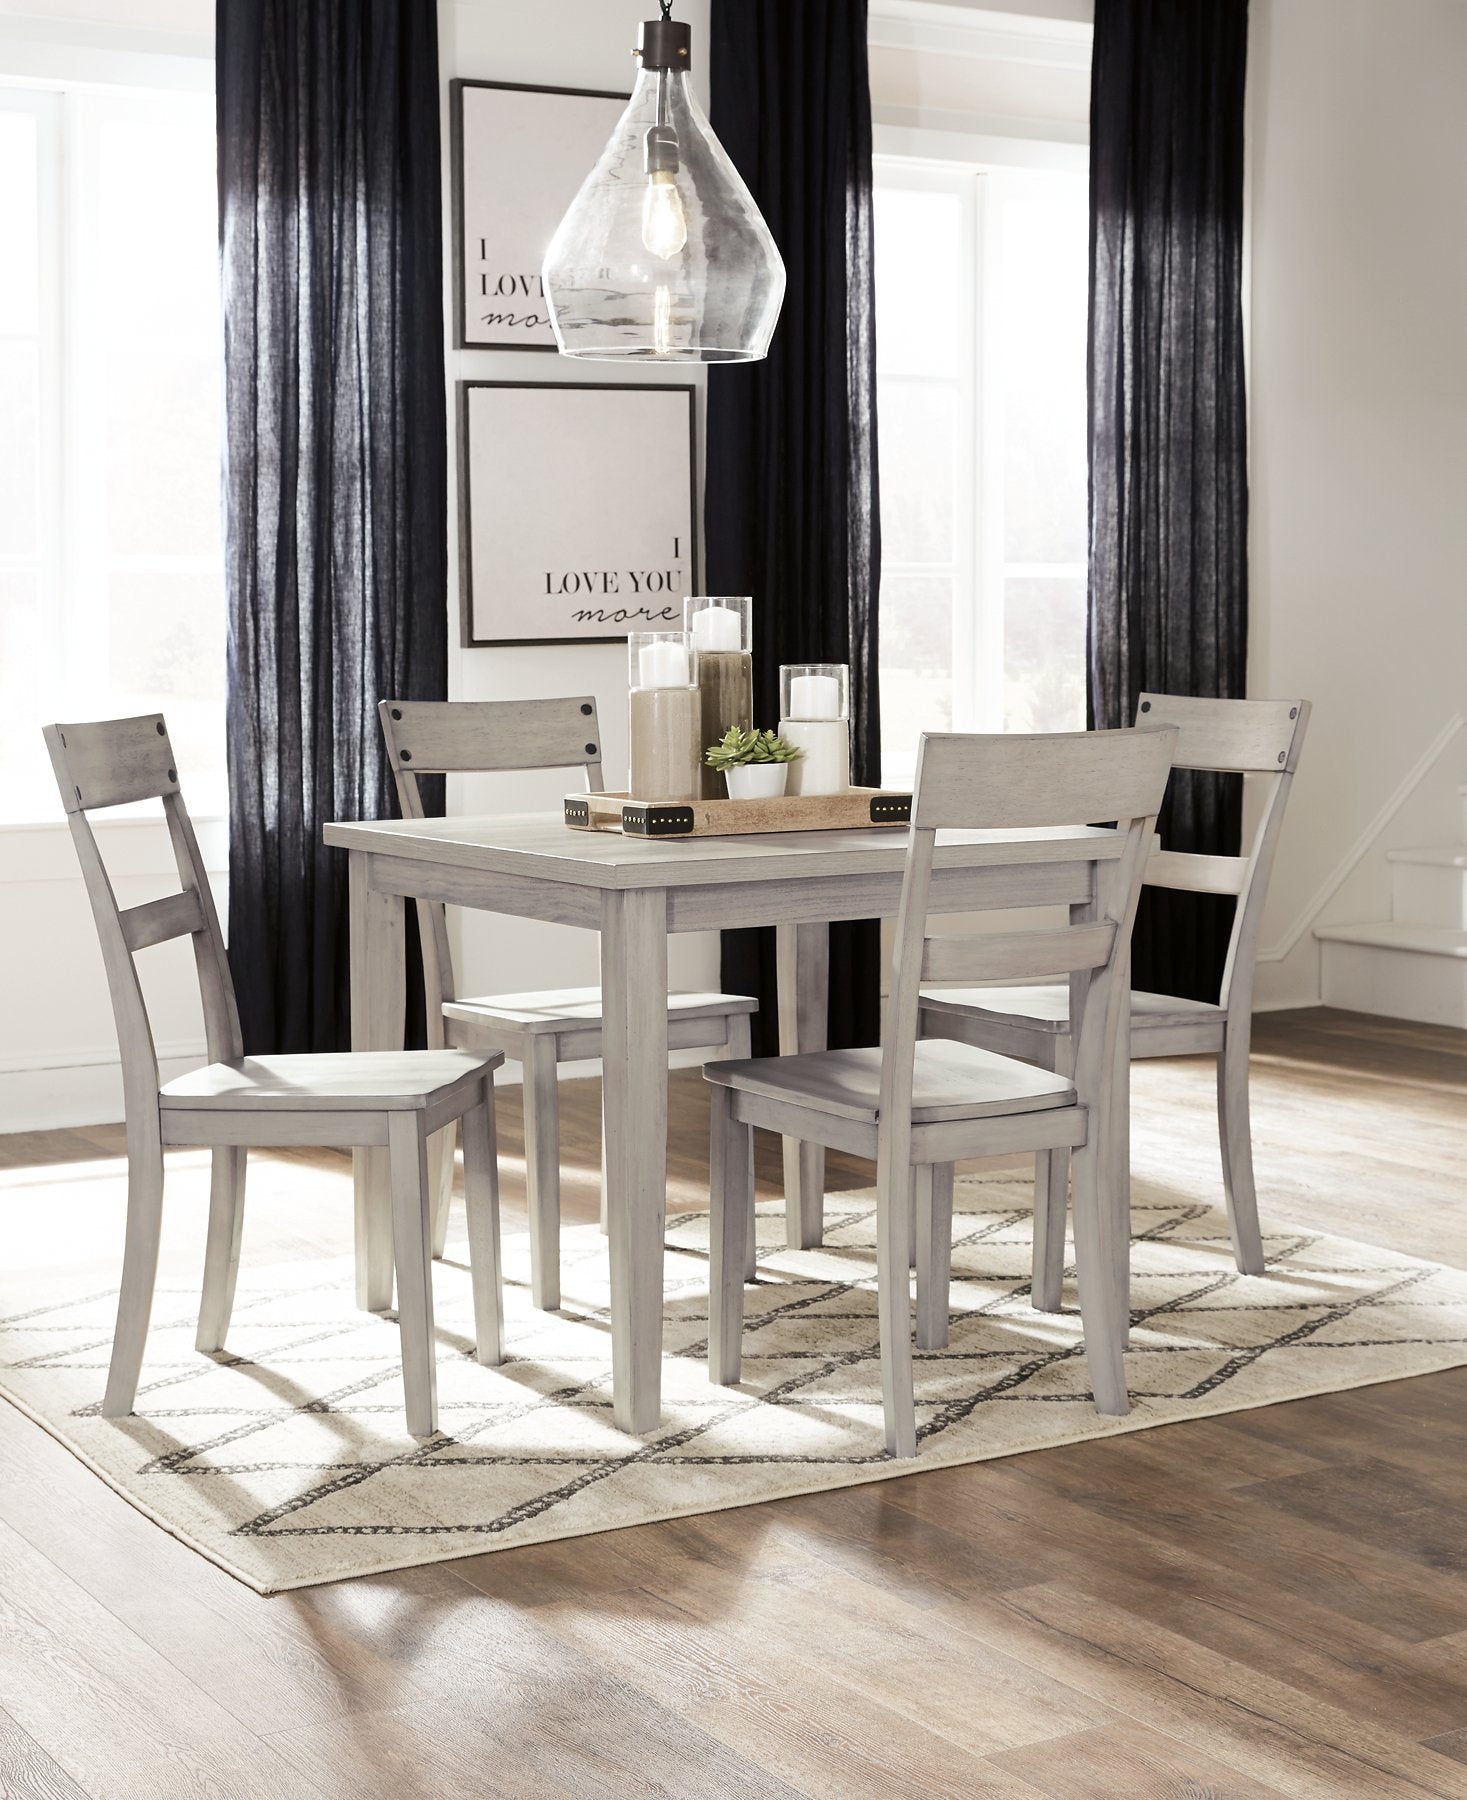 Loratti Dining Table and 4 Chairs